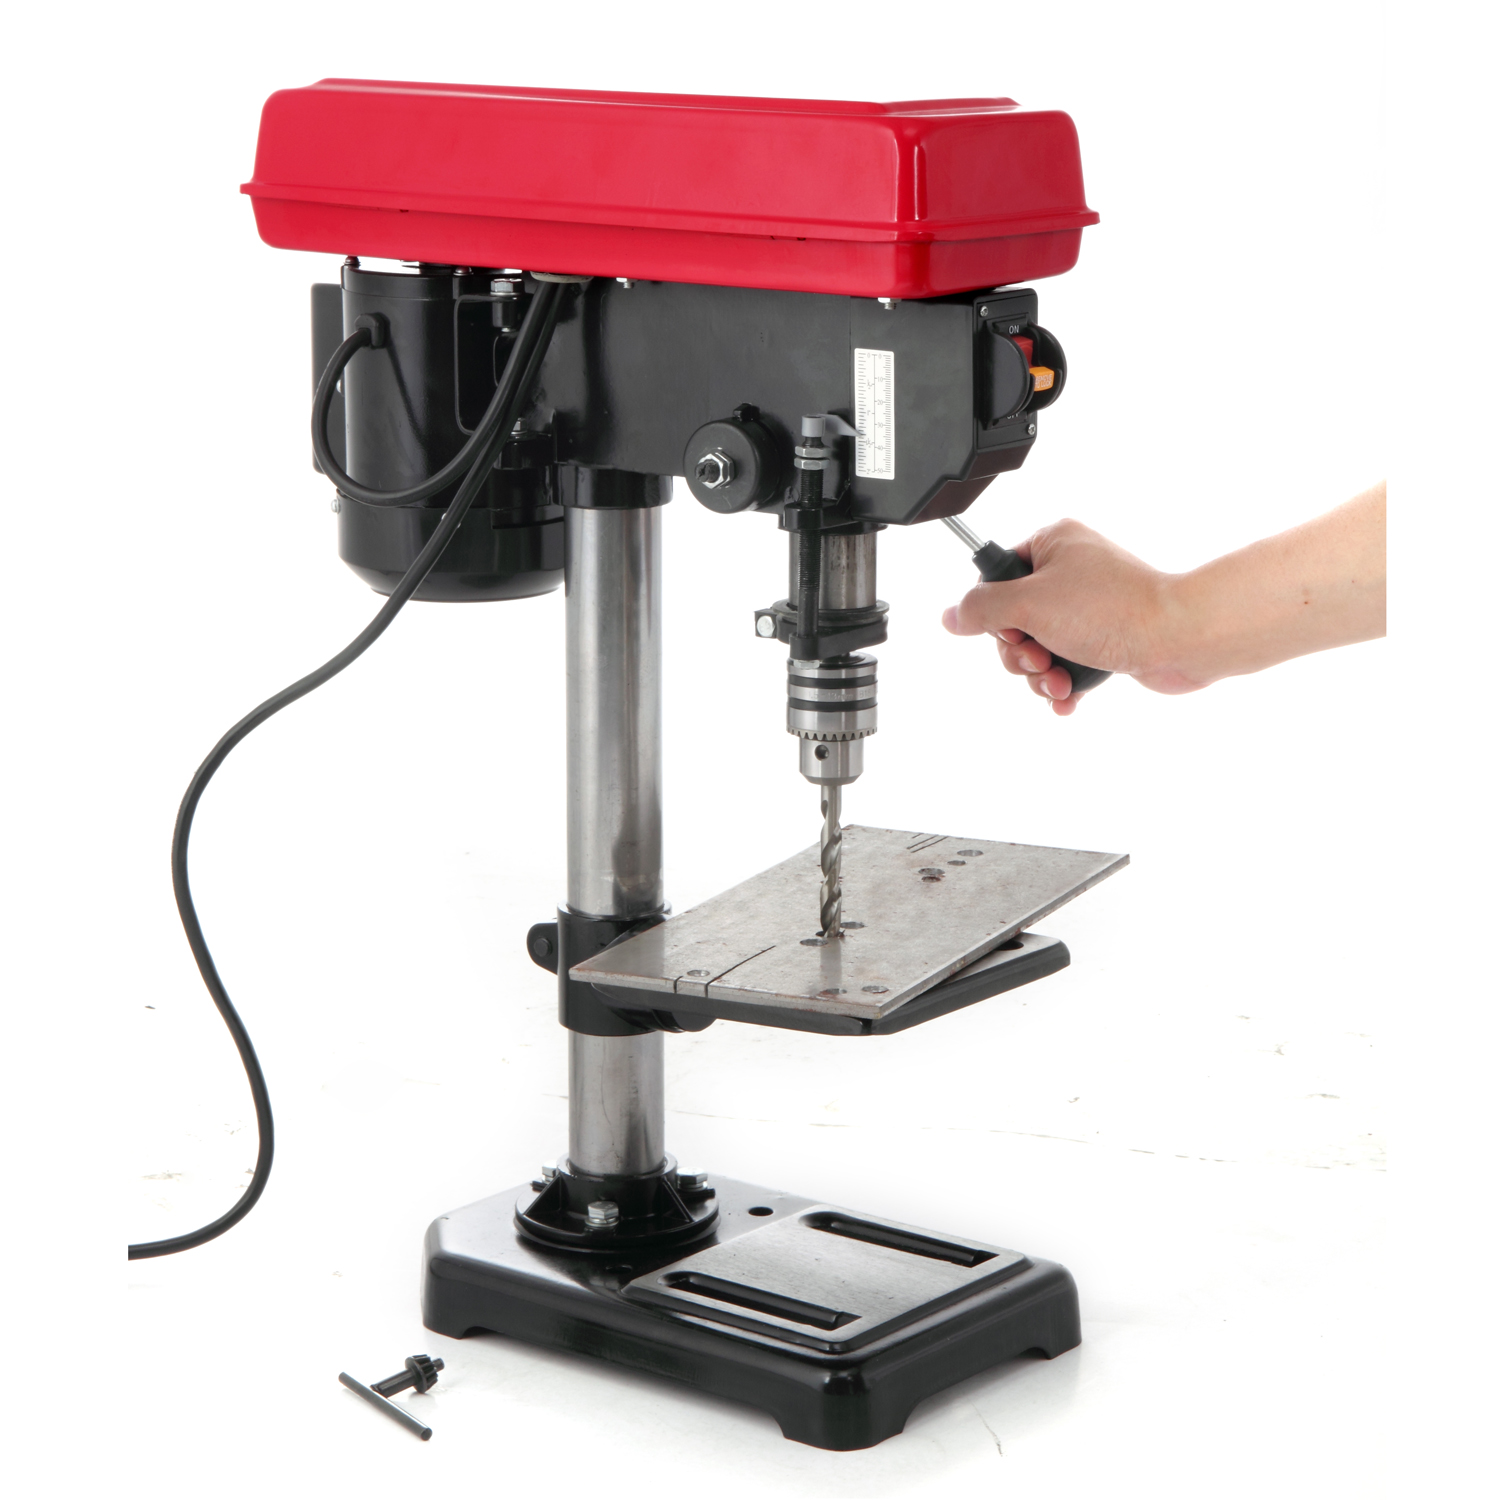 Hyper Tough 2.4 AMP Corded 8 inch Drill Press, 1/2 inch Chuck, 5 Speed with Depth Stop and Three Stem Handle - image 3 of 11